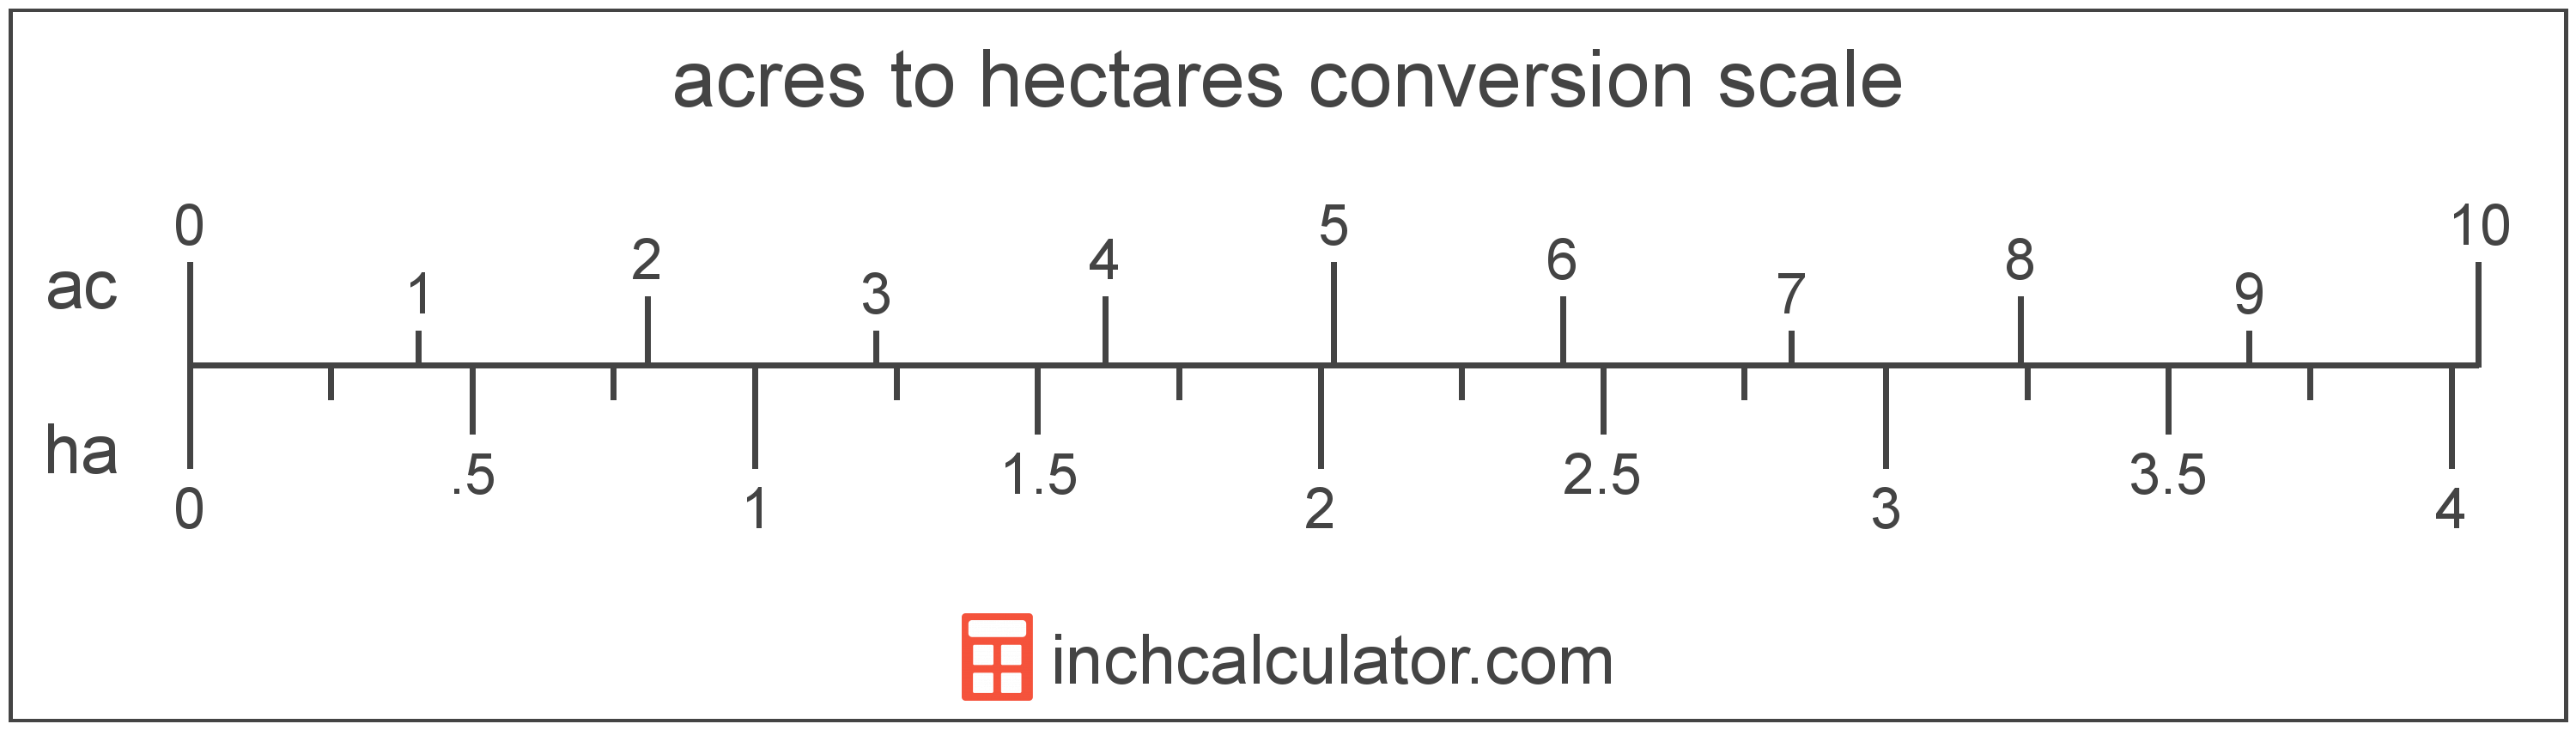 acres-to-hectares-conversion-ac-to-ha-inch-calculator